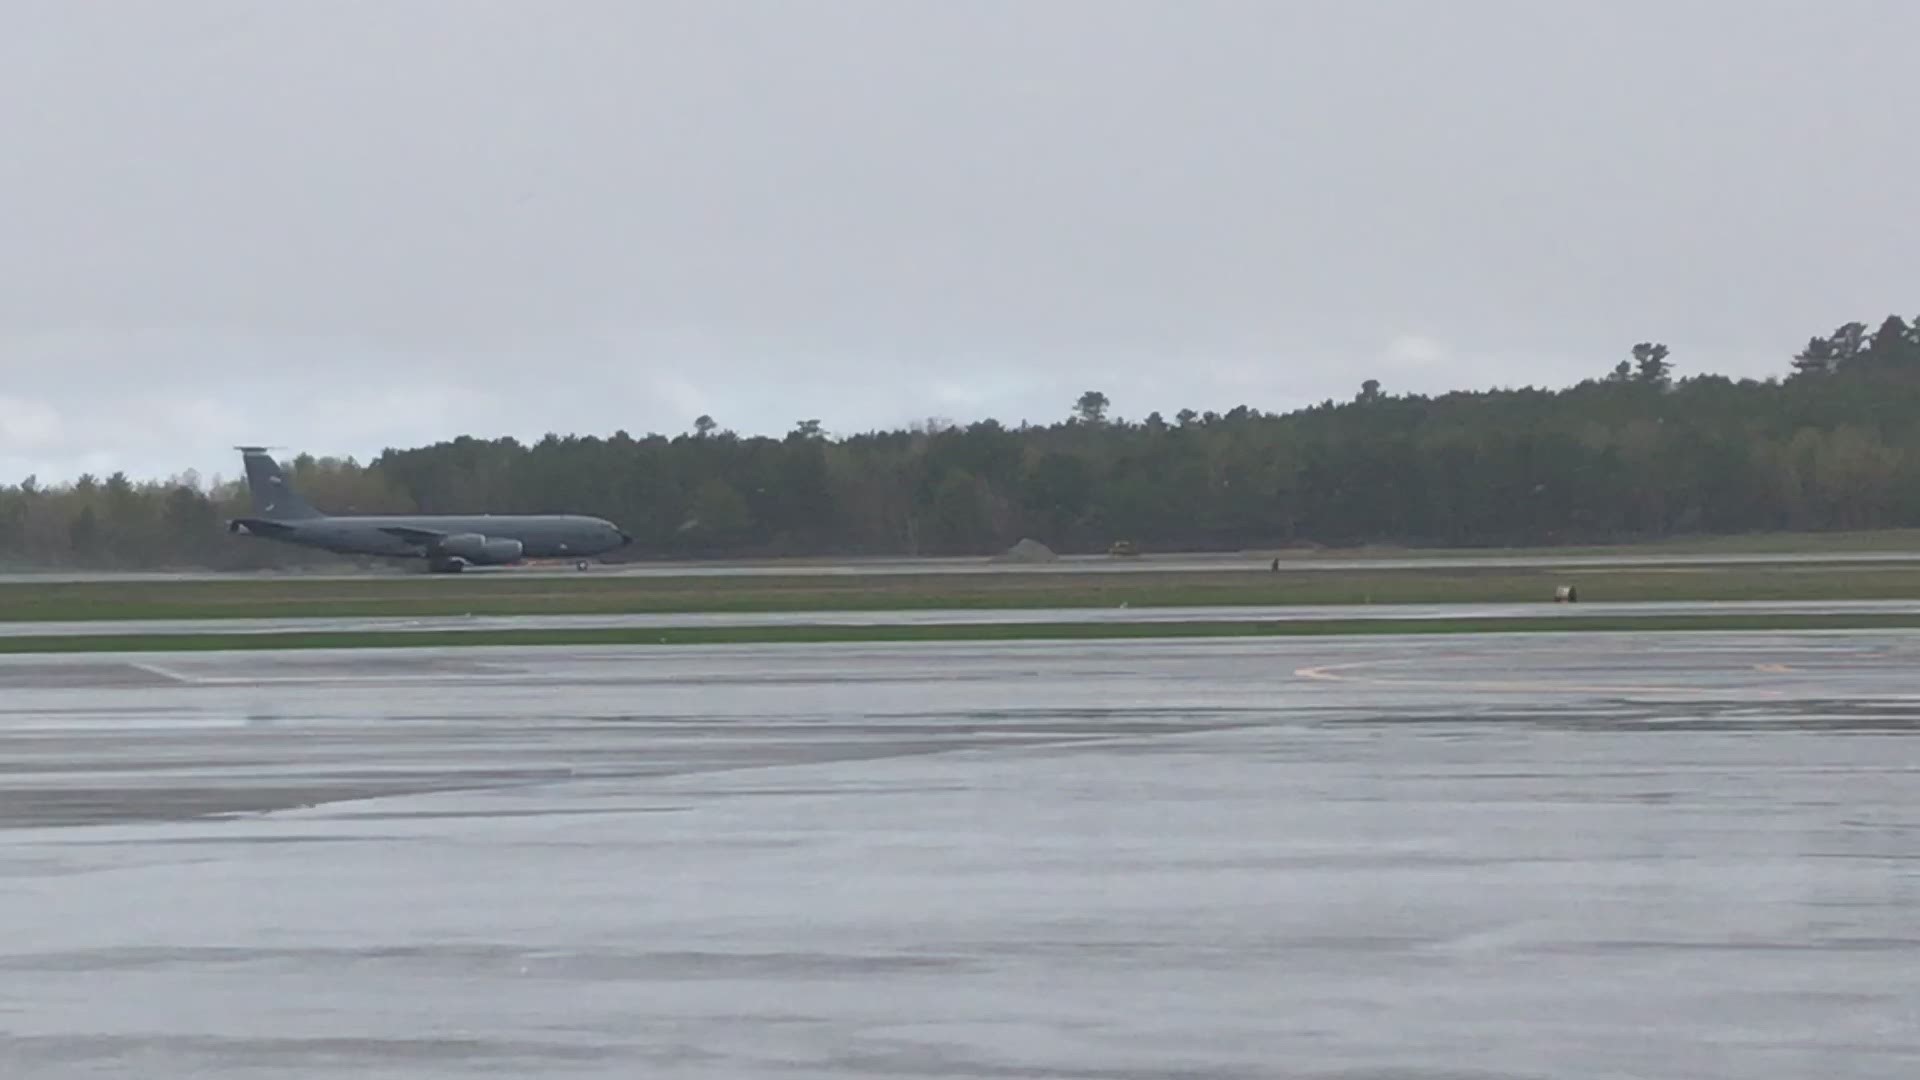 One of two jets taking off from Bangor International Airport on Tuesday, as the National Guard honors Maine's healthcare workers and frontline workers.